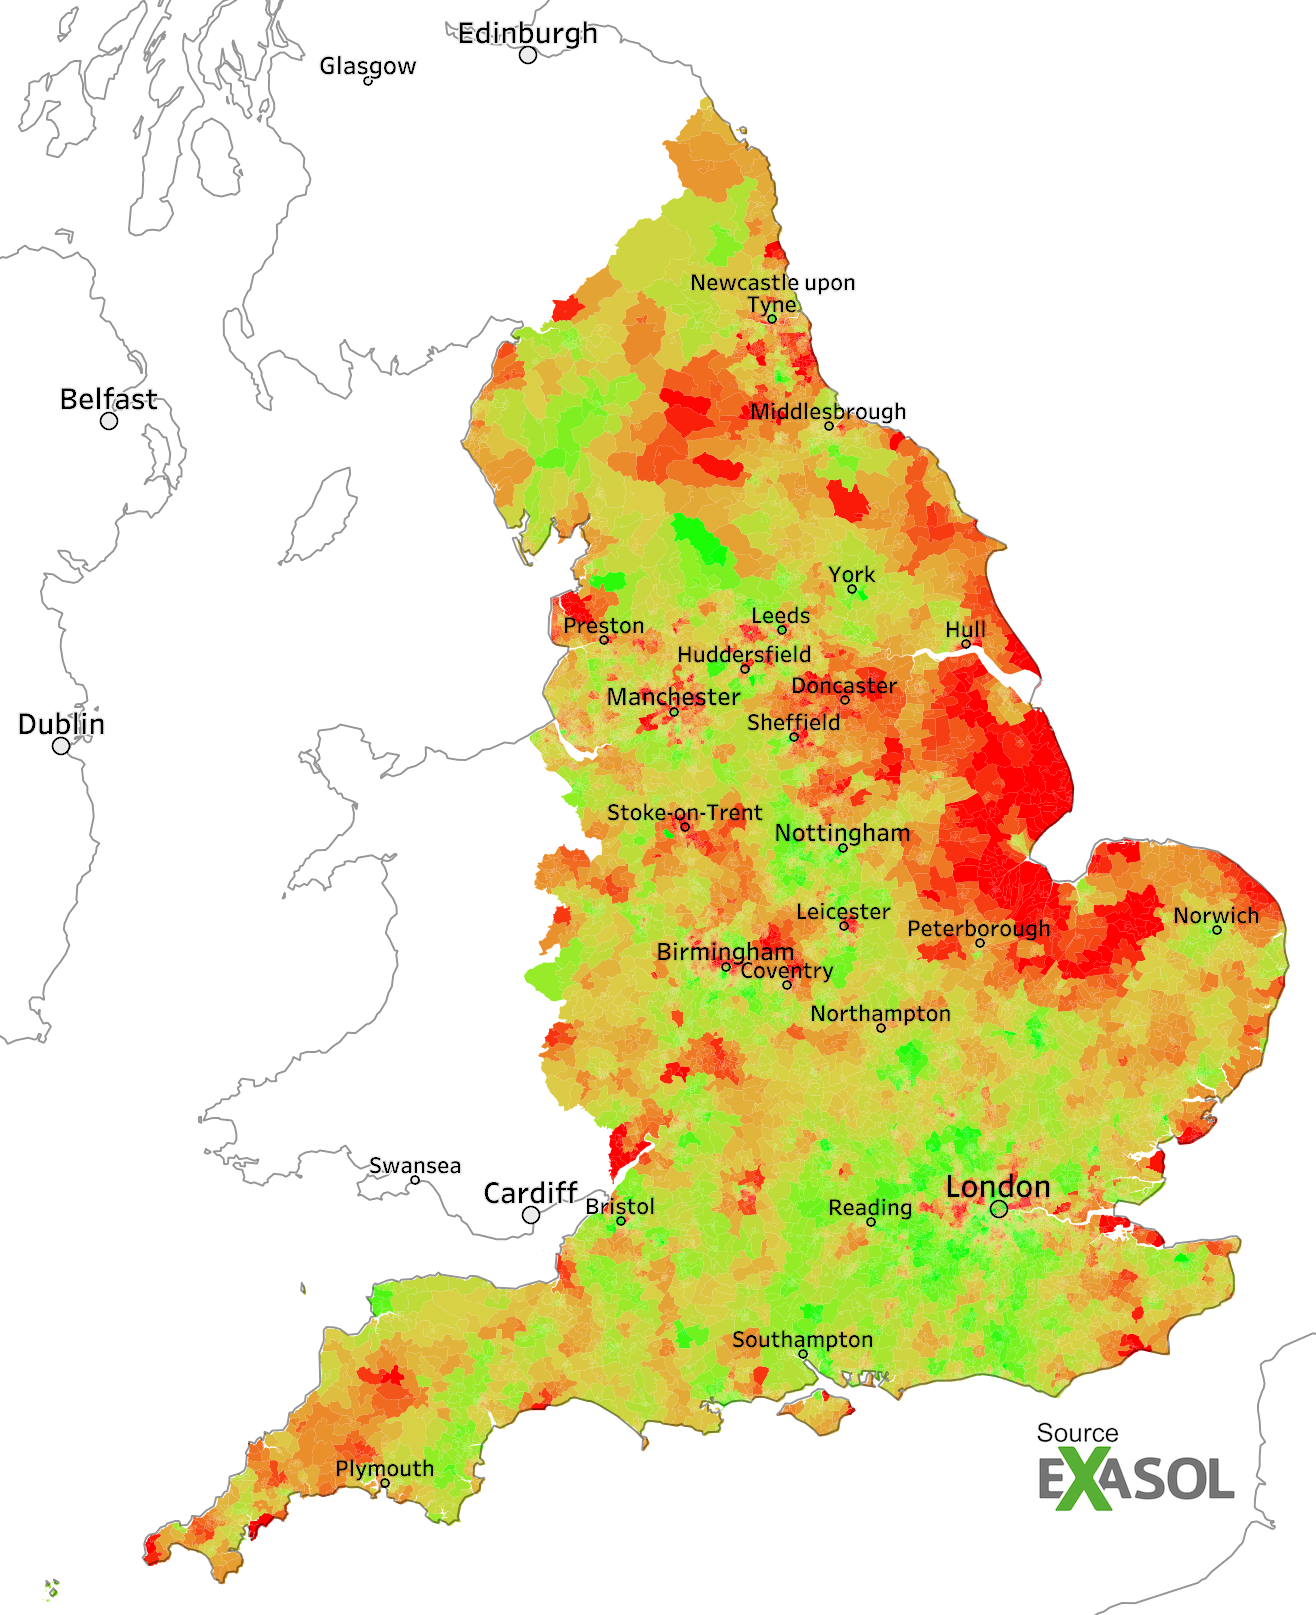 A heat map showing the rates of prescriptions for type 2 diabetes in 2015